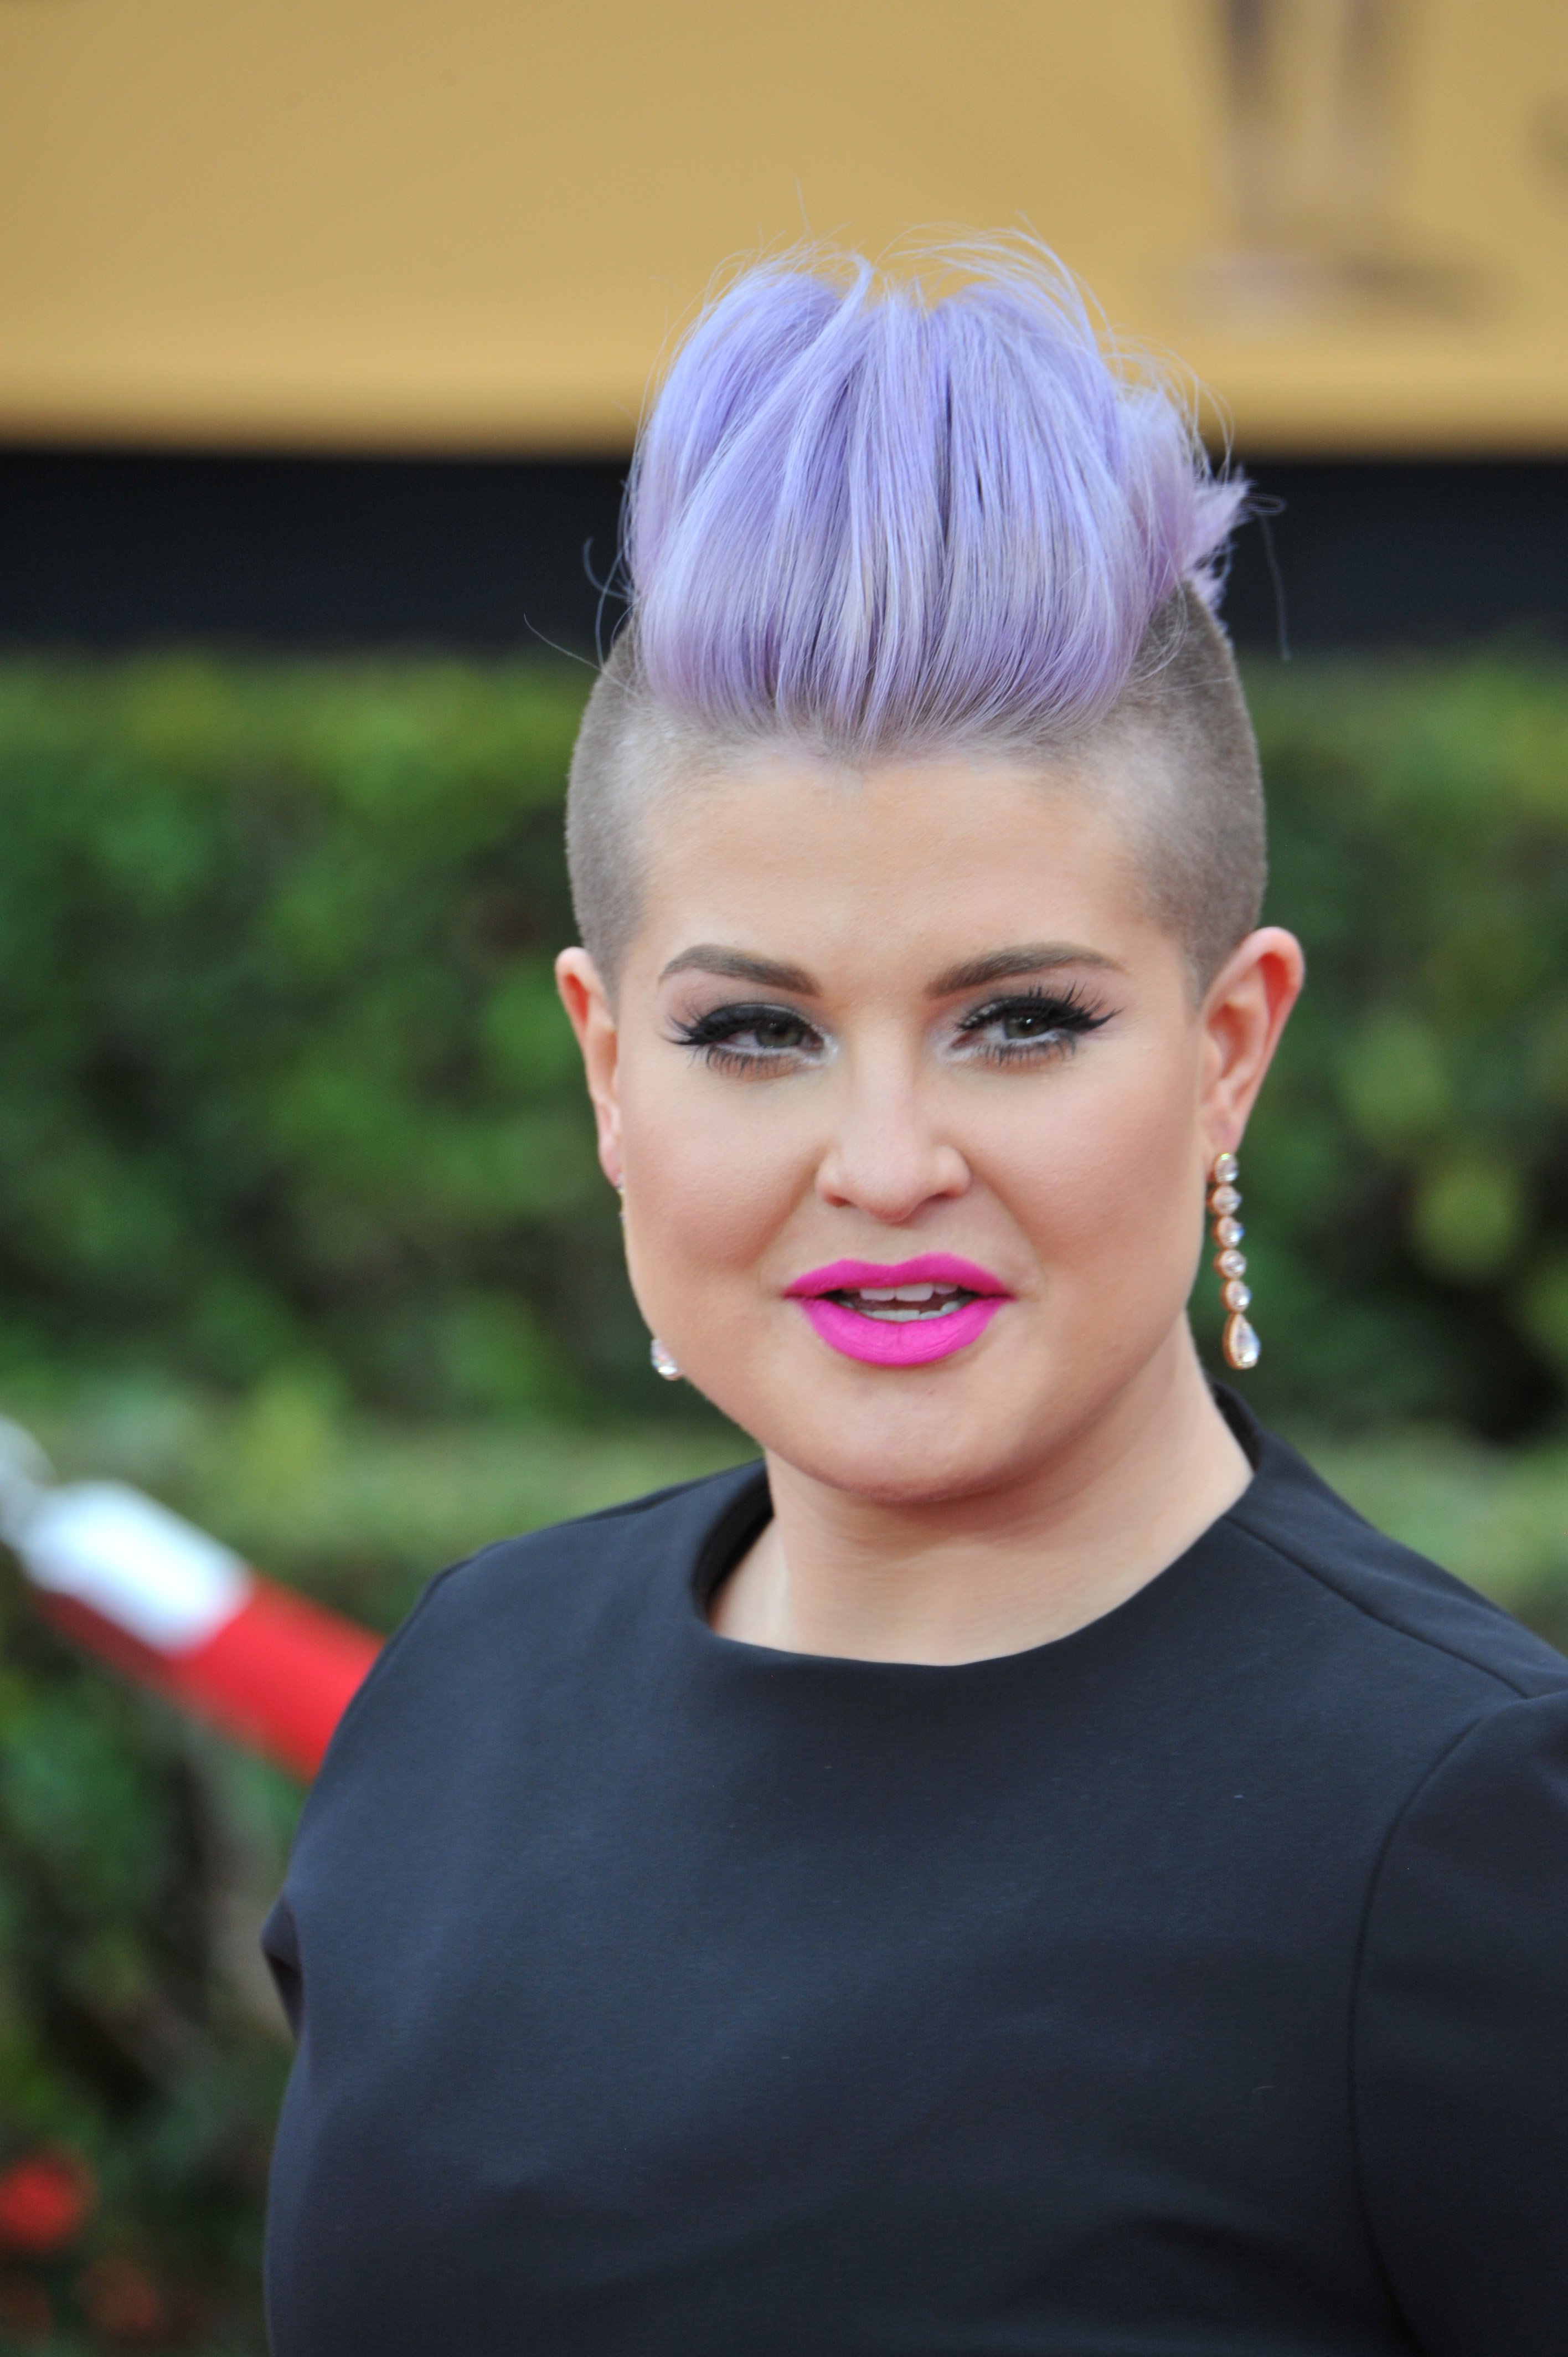 Kelly Osbourne at the 2015 Screen Actors Guild Awards at the Shrine Auditorium. J on January 25, 2015 in Los Angeles | Photo: Shutterstock